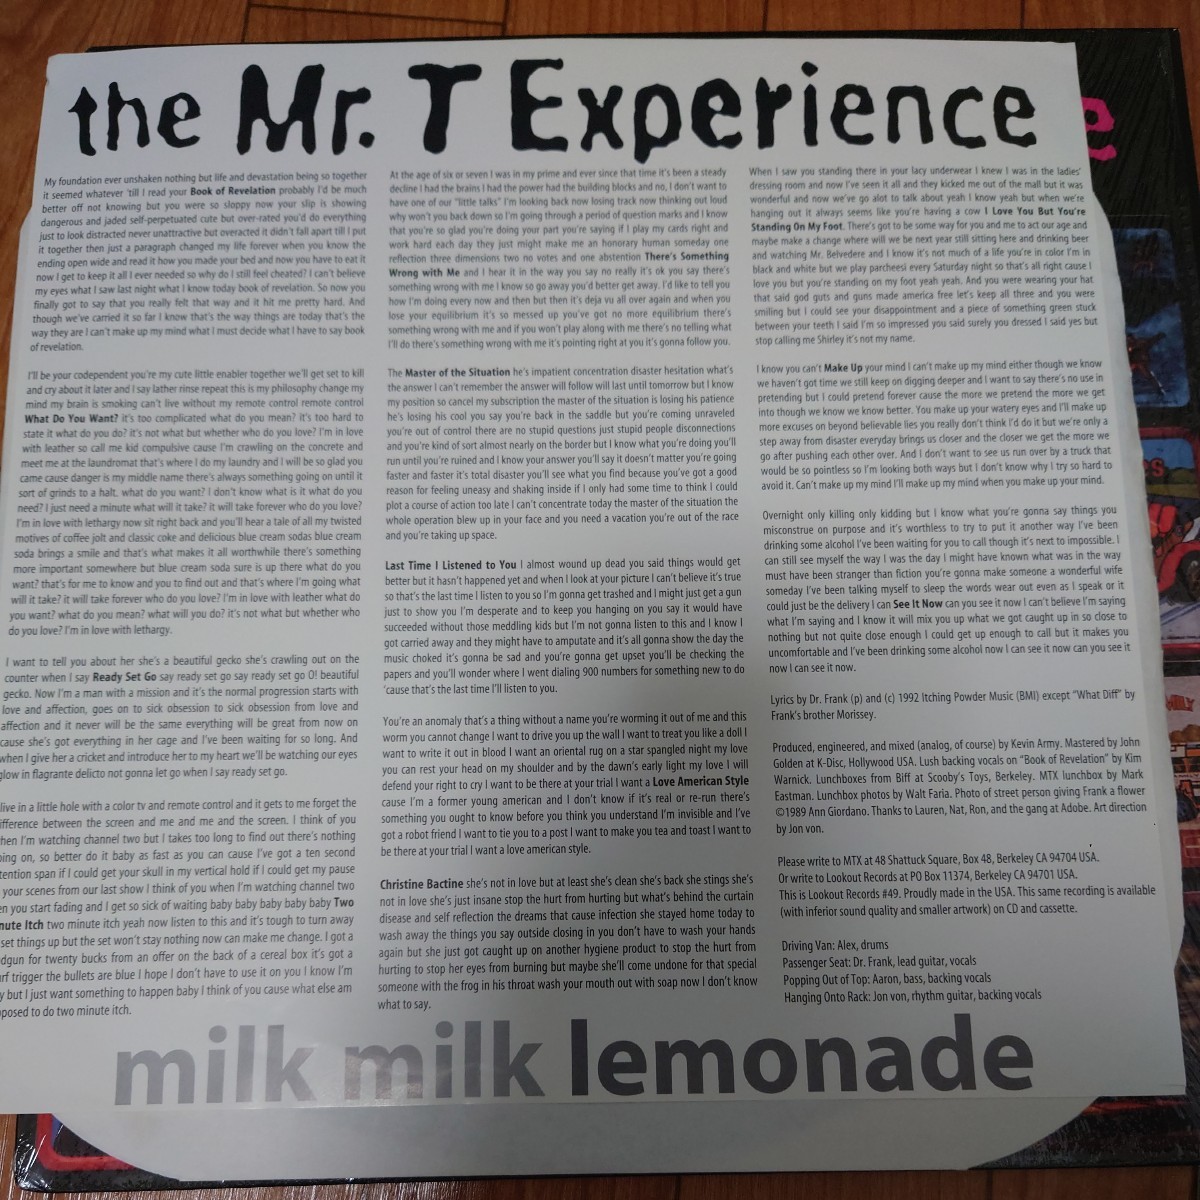 The Mr. T Experience - Milk Milk Lemonade / Mr T. Experience With Sicko Together Tonight 80 Dollars 7” 2枚セット Original_画像5